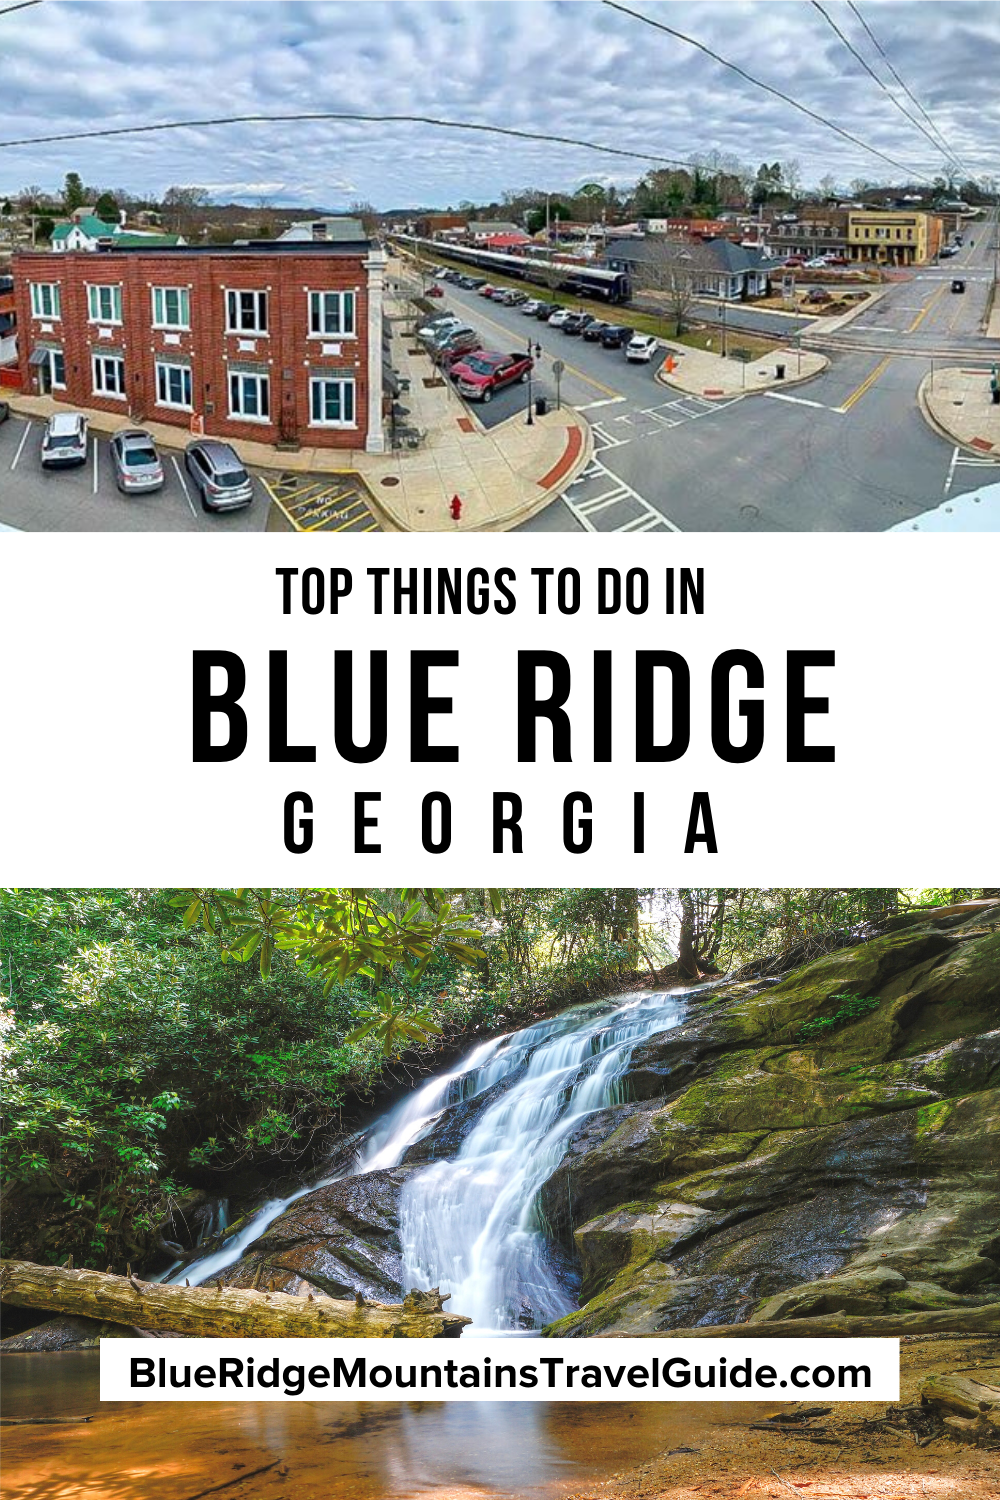 Top 20 Things to Do in the Blue Ridge Mountains of Georgia